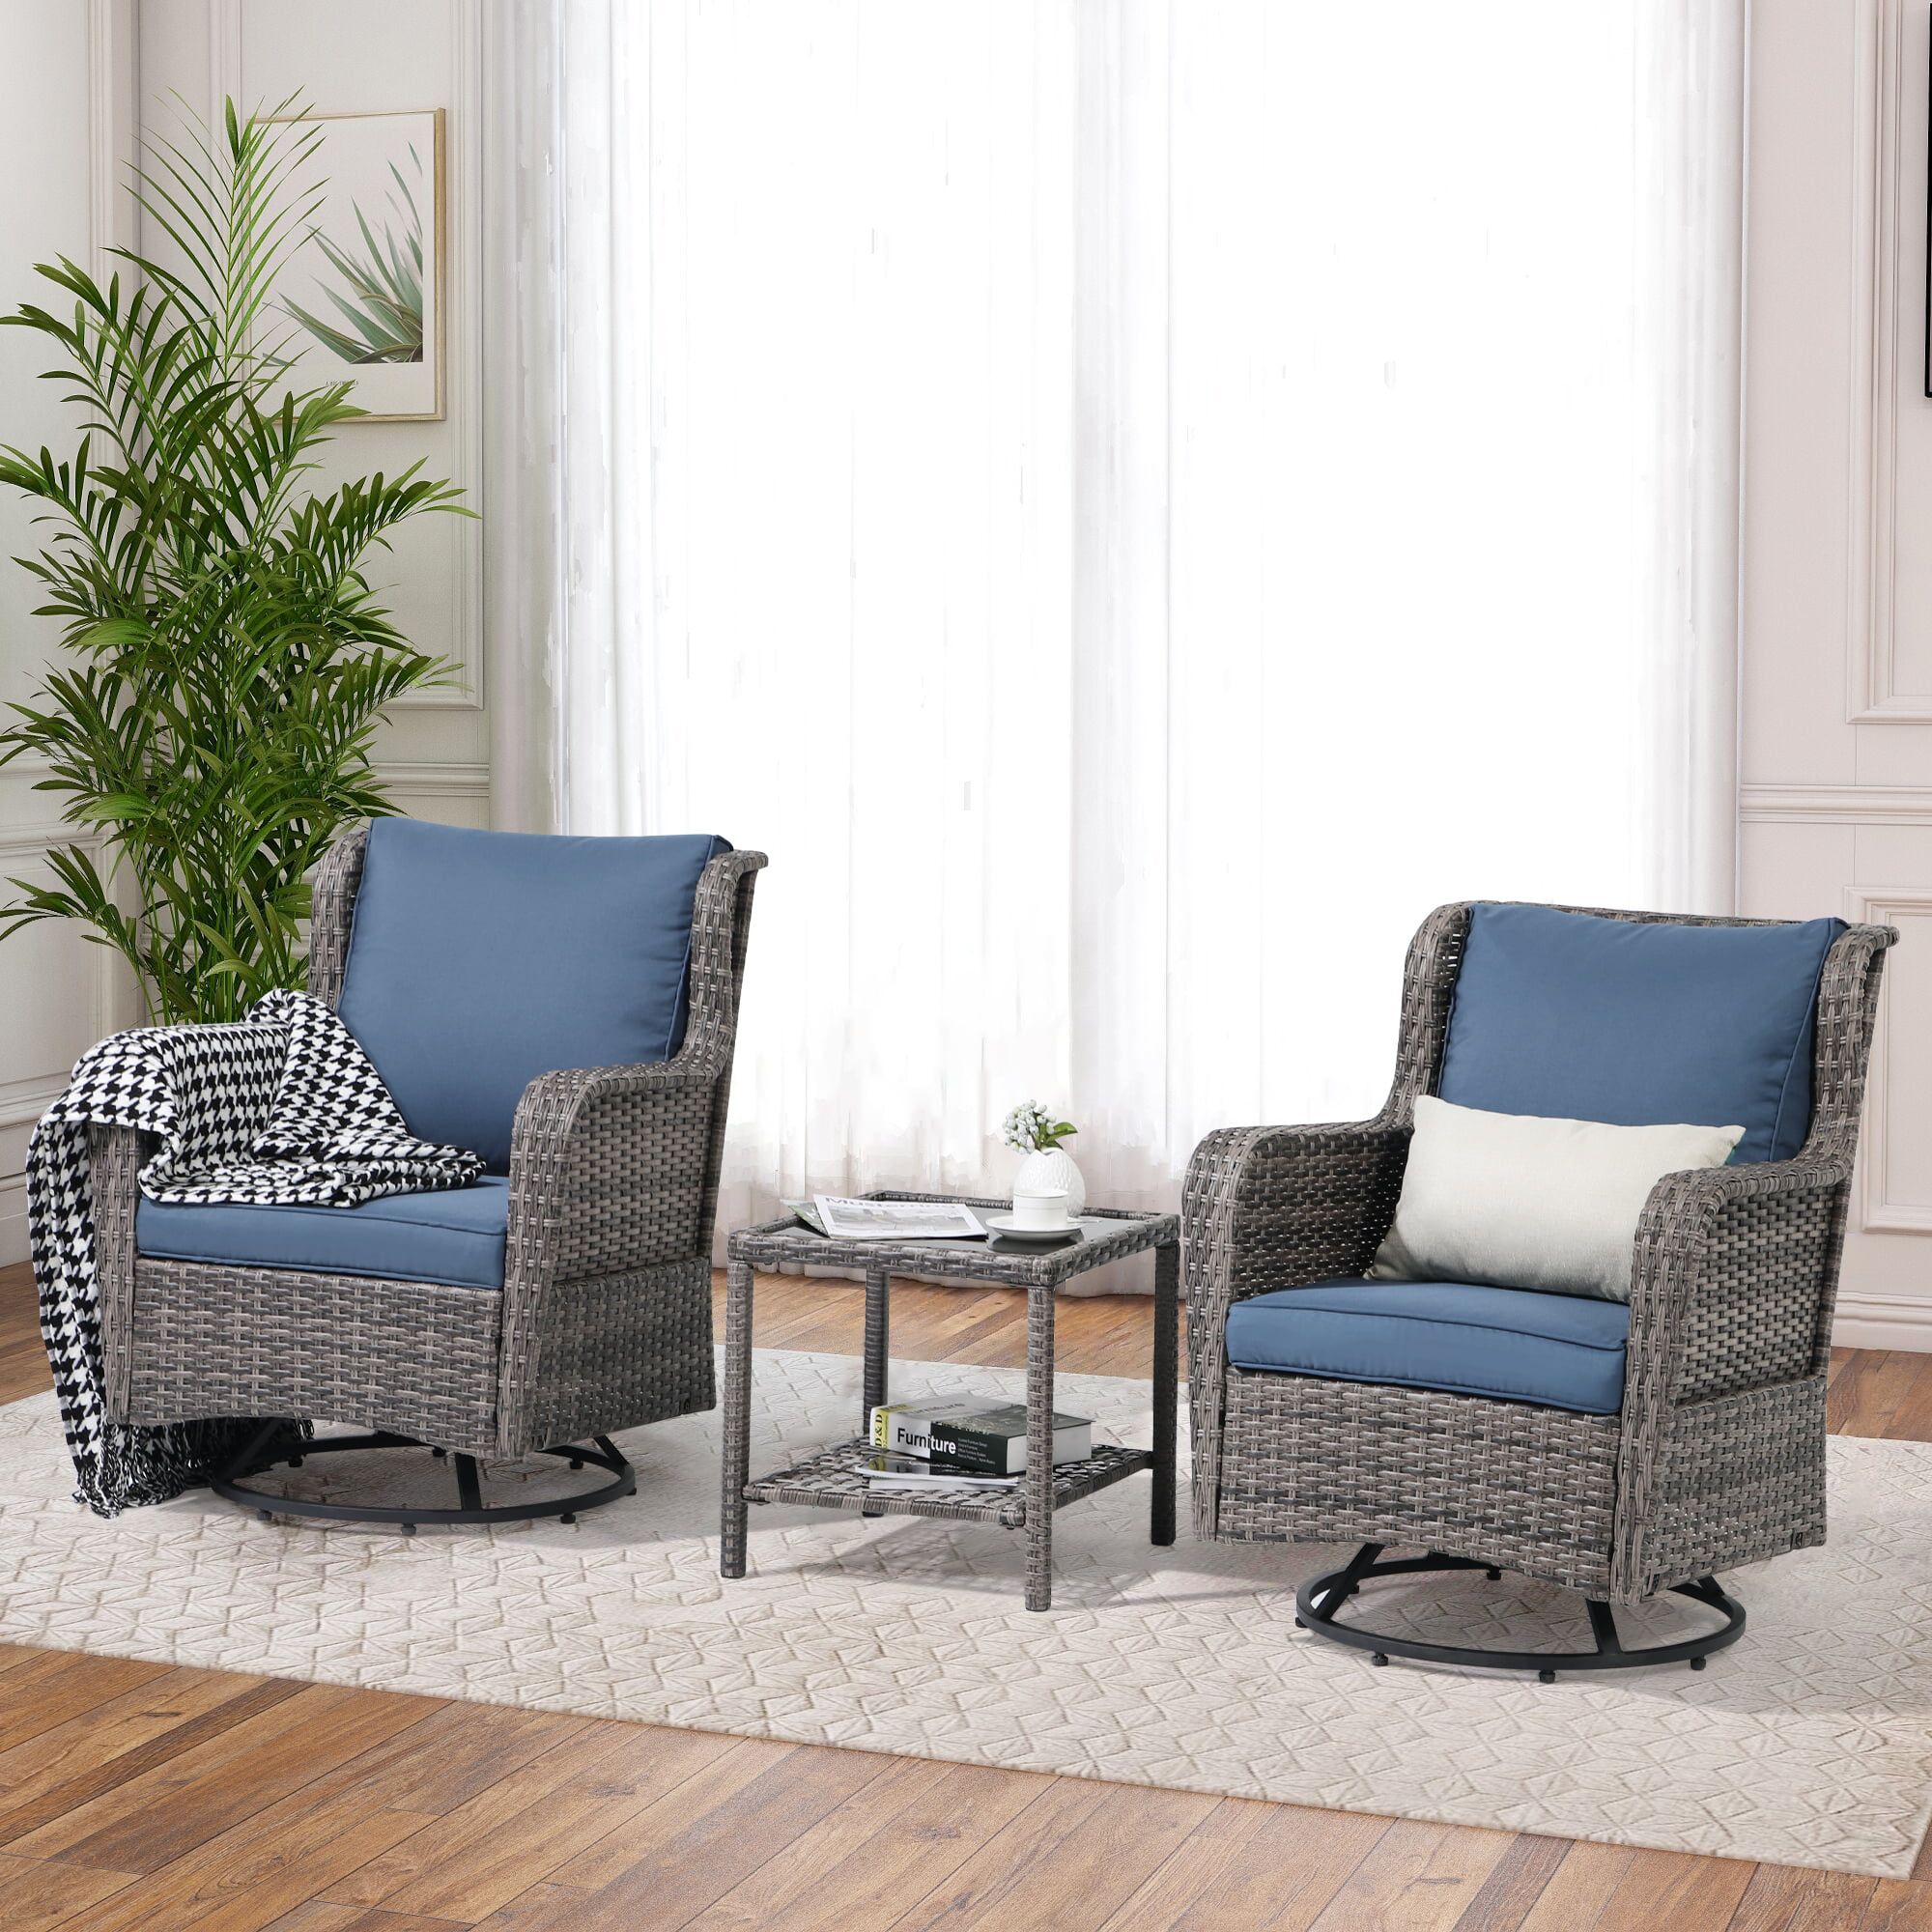 Joivi Patio Swivel Rocker Set, Outdoor Wicker Swivel Rocking Chairs With  Side Table, 3 Pieces All Weather Rattan Furniture Bistro Set With Thick  Cushions, Iron Frame, Navy Blue – Walmart In 3 Pieces Outdoor Patio Swivel Rocker Set (View 8 of 15)